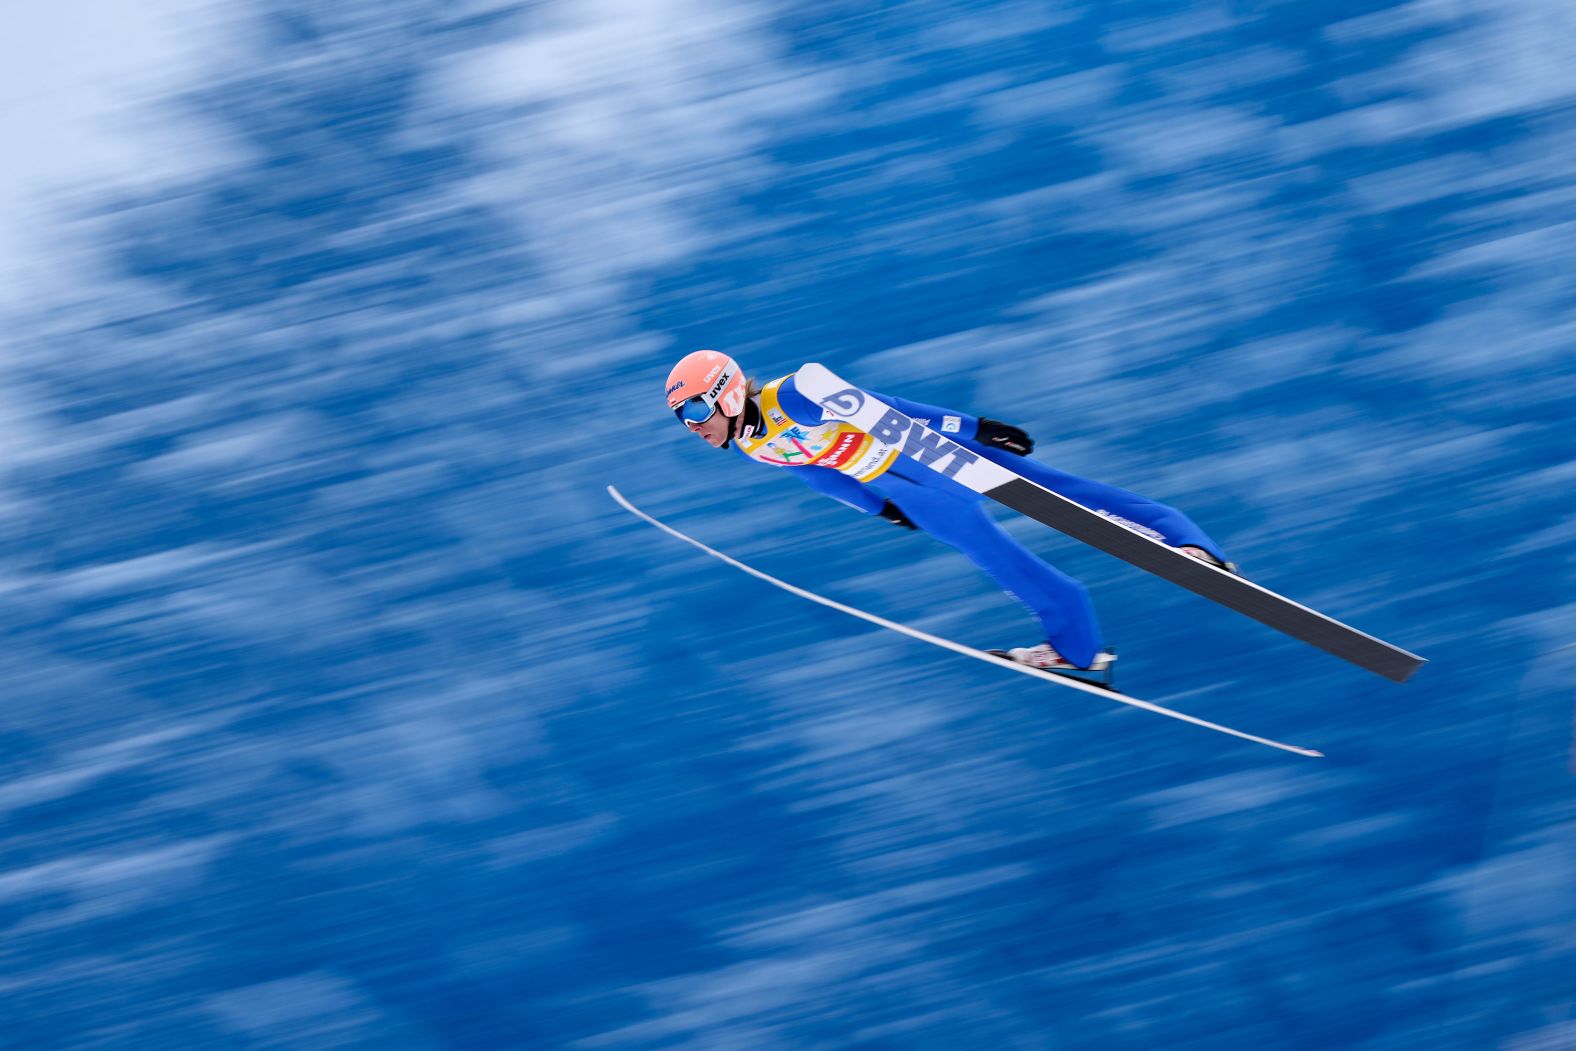 Poland's Dawid Kubacki soars through the air during a World Cup ski flying event in Bad Mitterndorf, Austria, on Saturday, January 28.